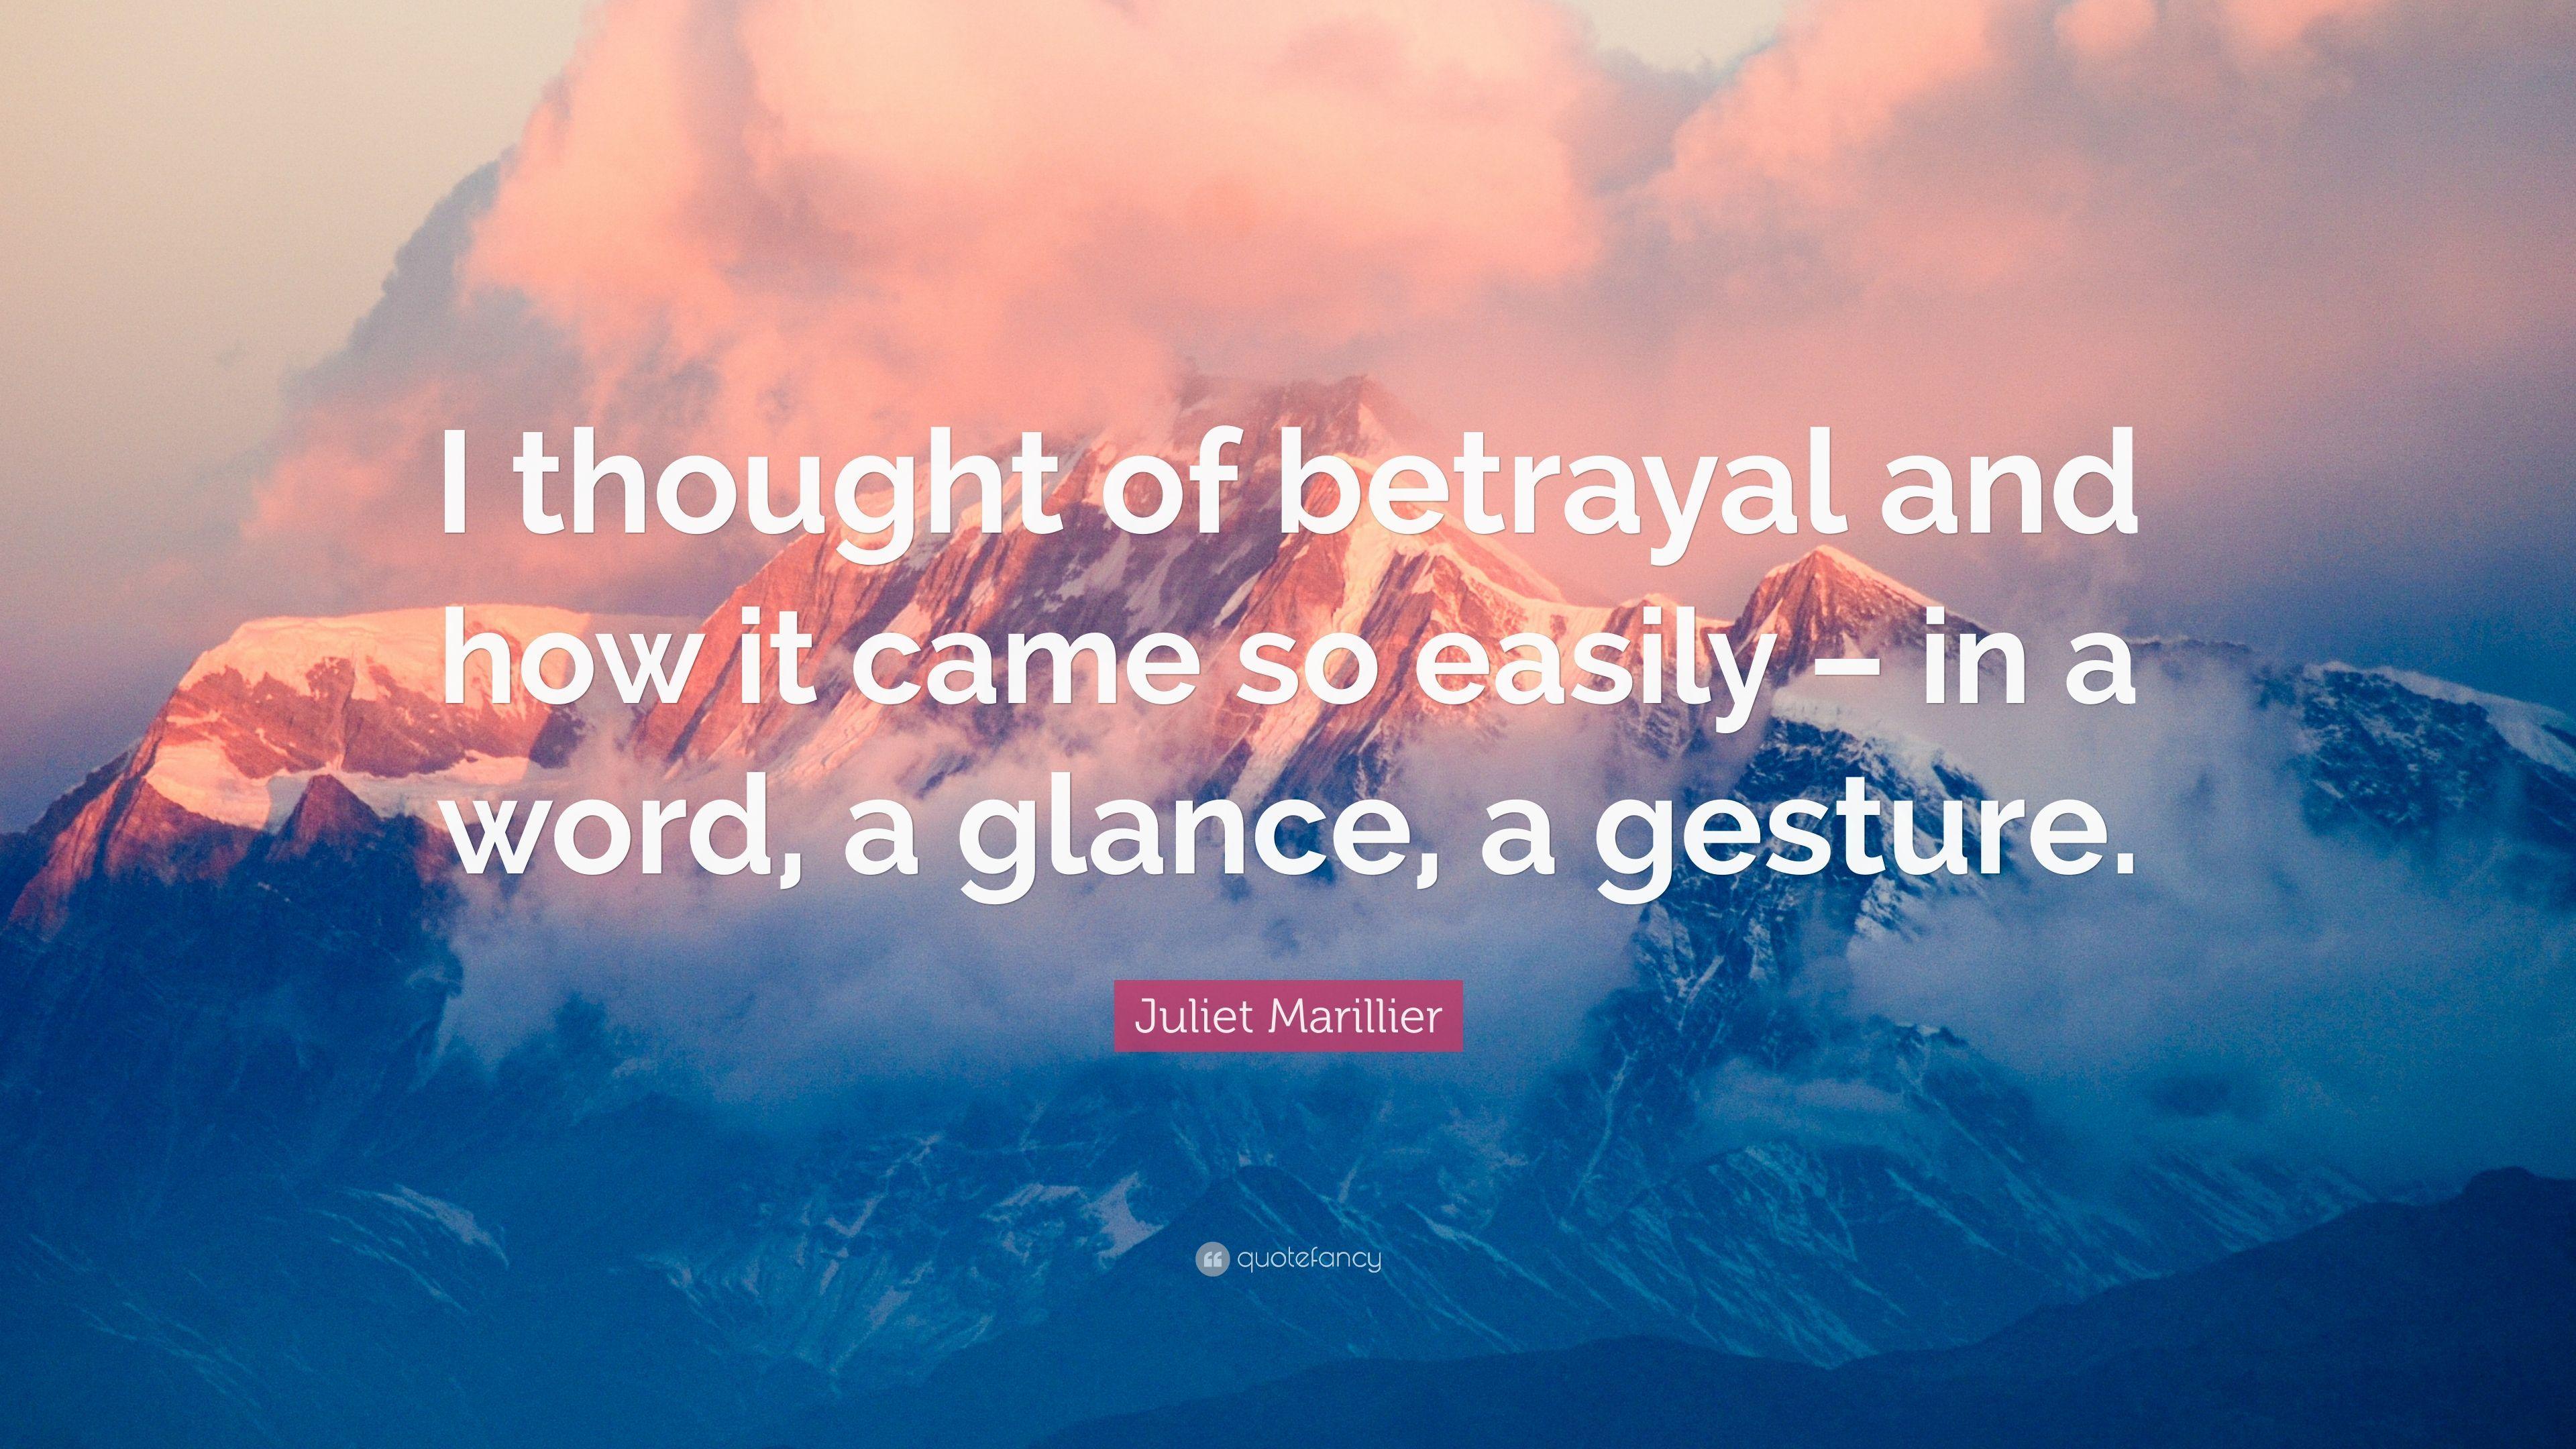 Juliet Marillier Quote: “I thought of betrayal and how it came so